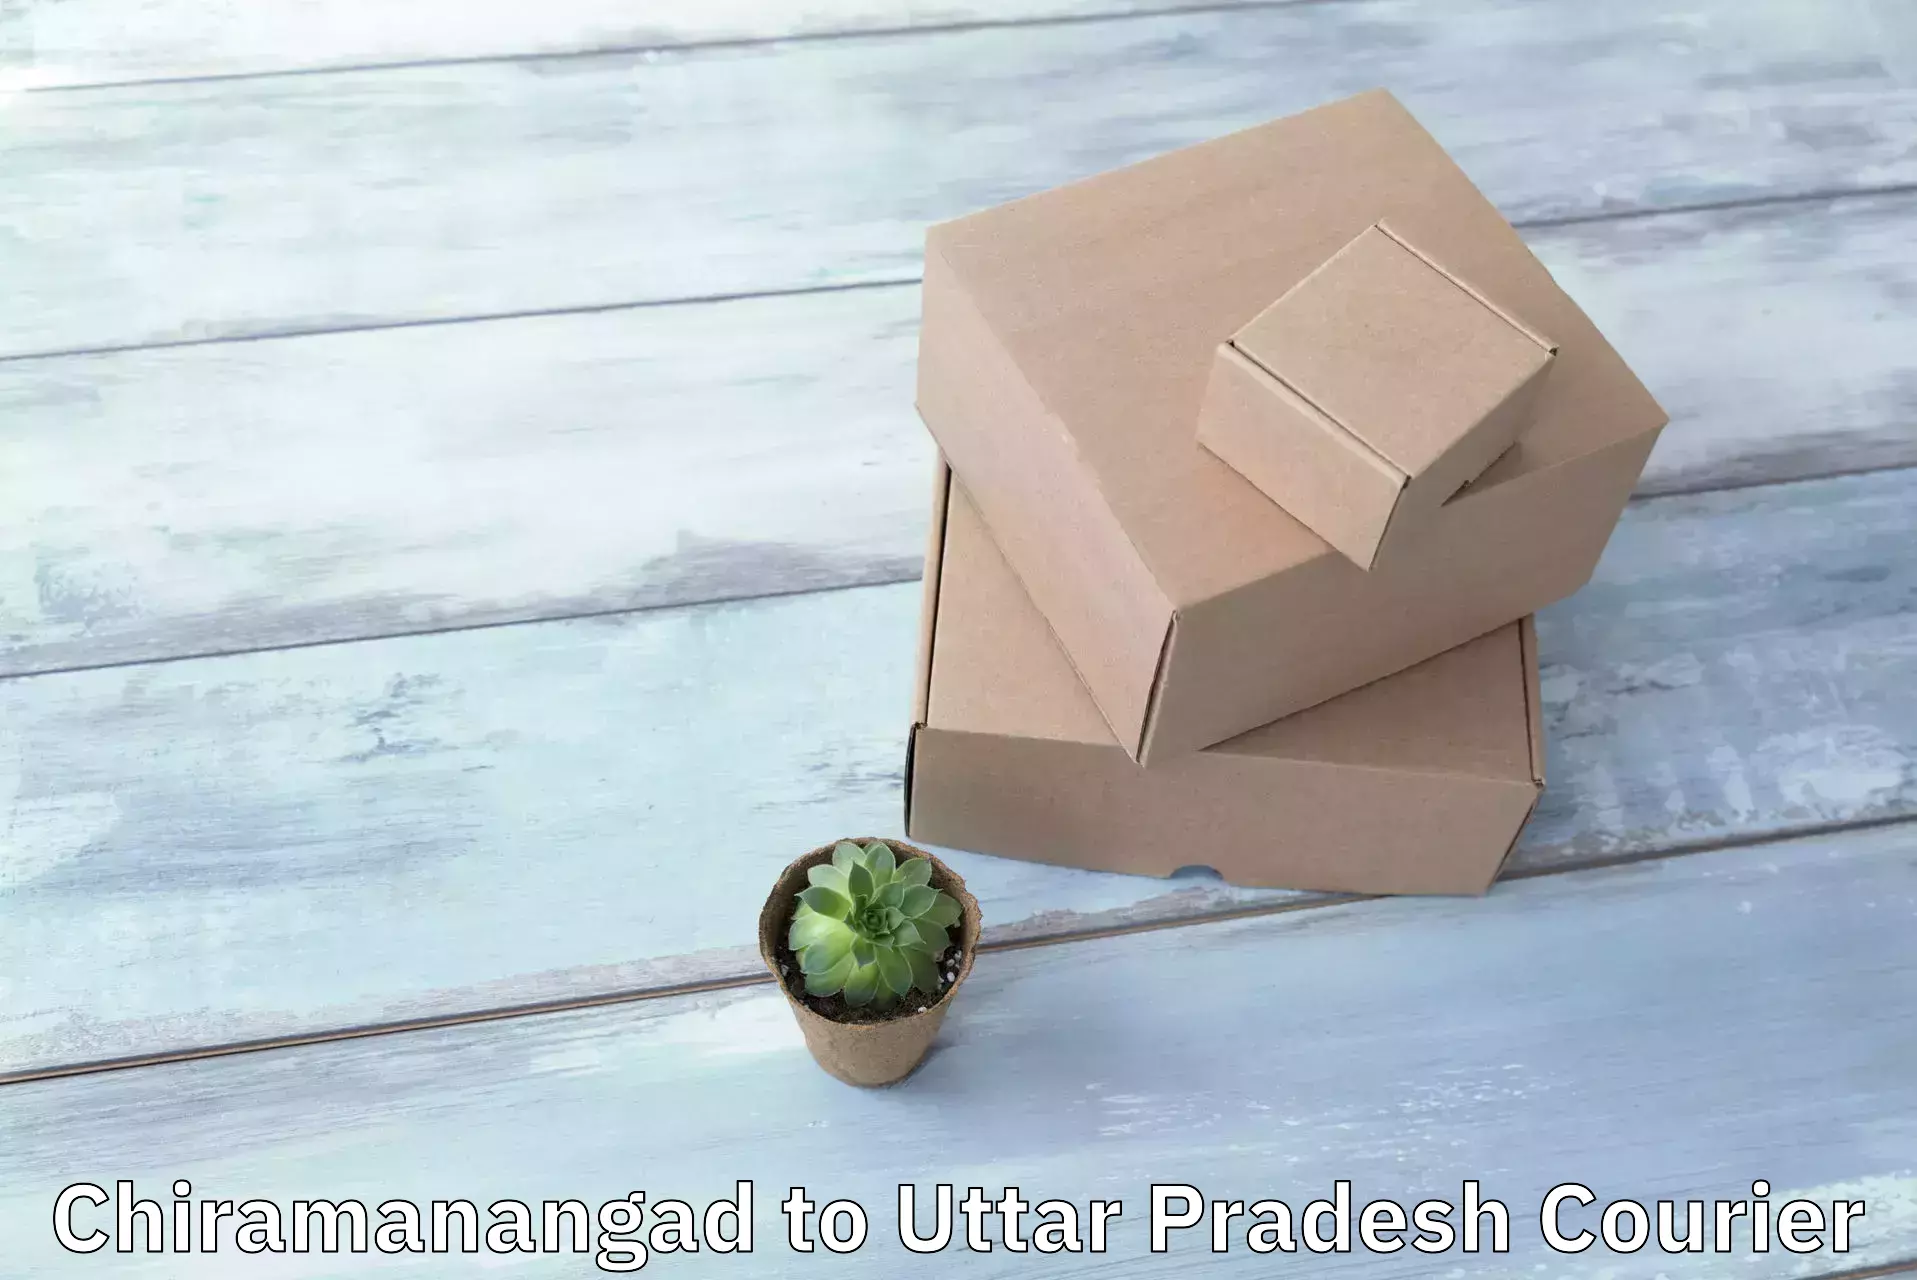 Doorstep delivery service in Chiramanangad to Utraula